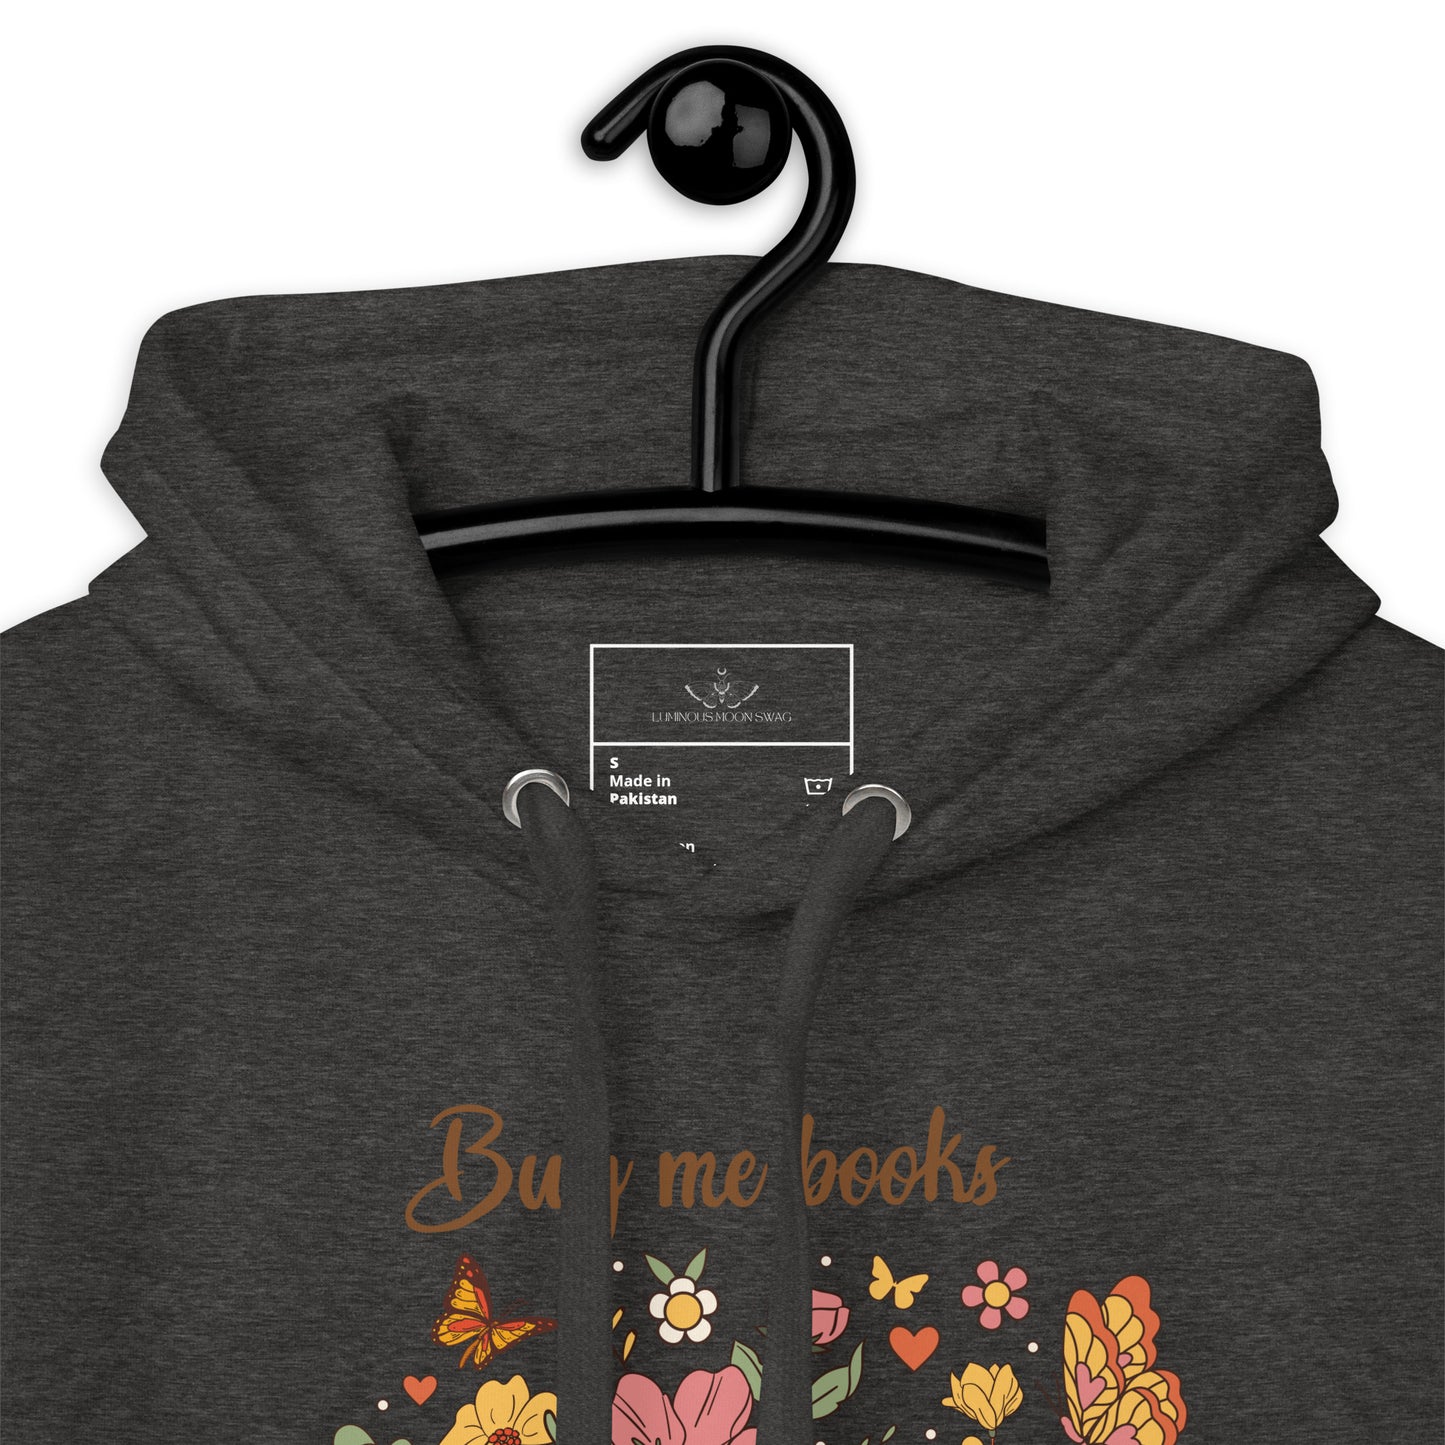 Buy Me Books and Tell Me to STFUATTDLAGG Unisex Hoodie